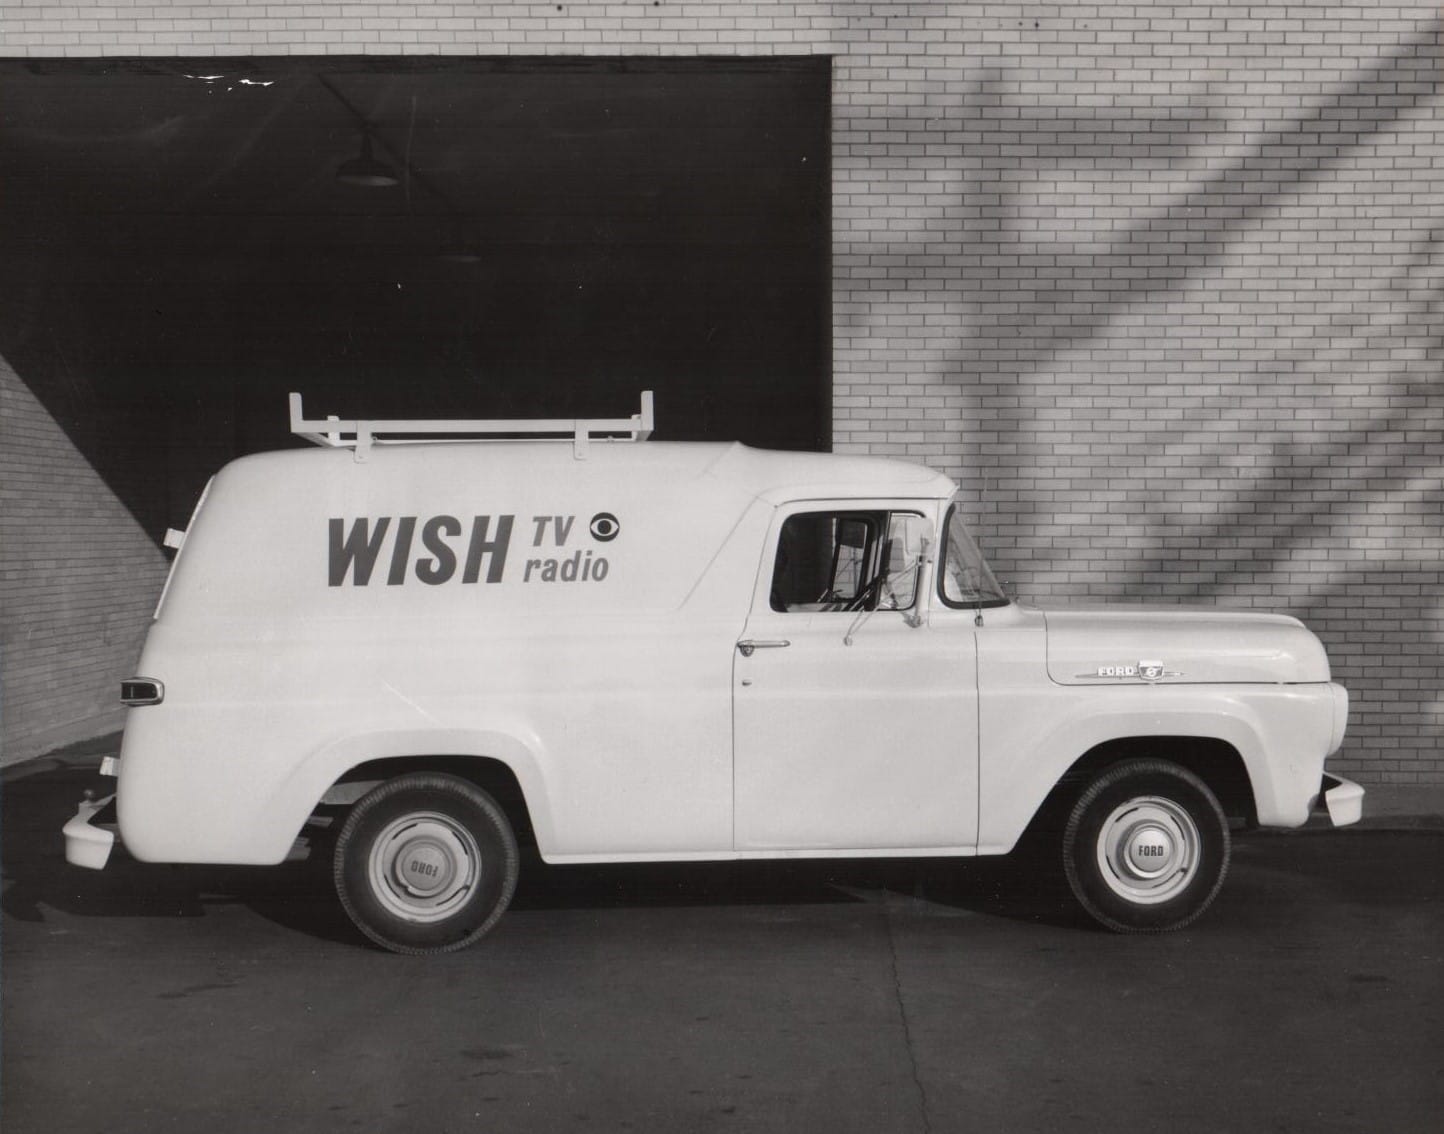 For a time, WISH-TV and WISH-Radio shared vehicles.